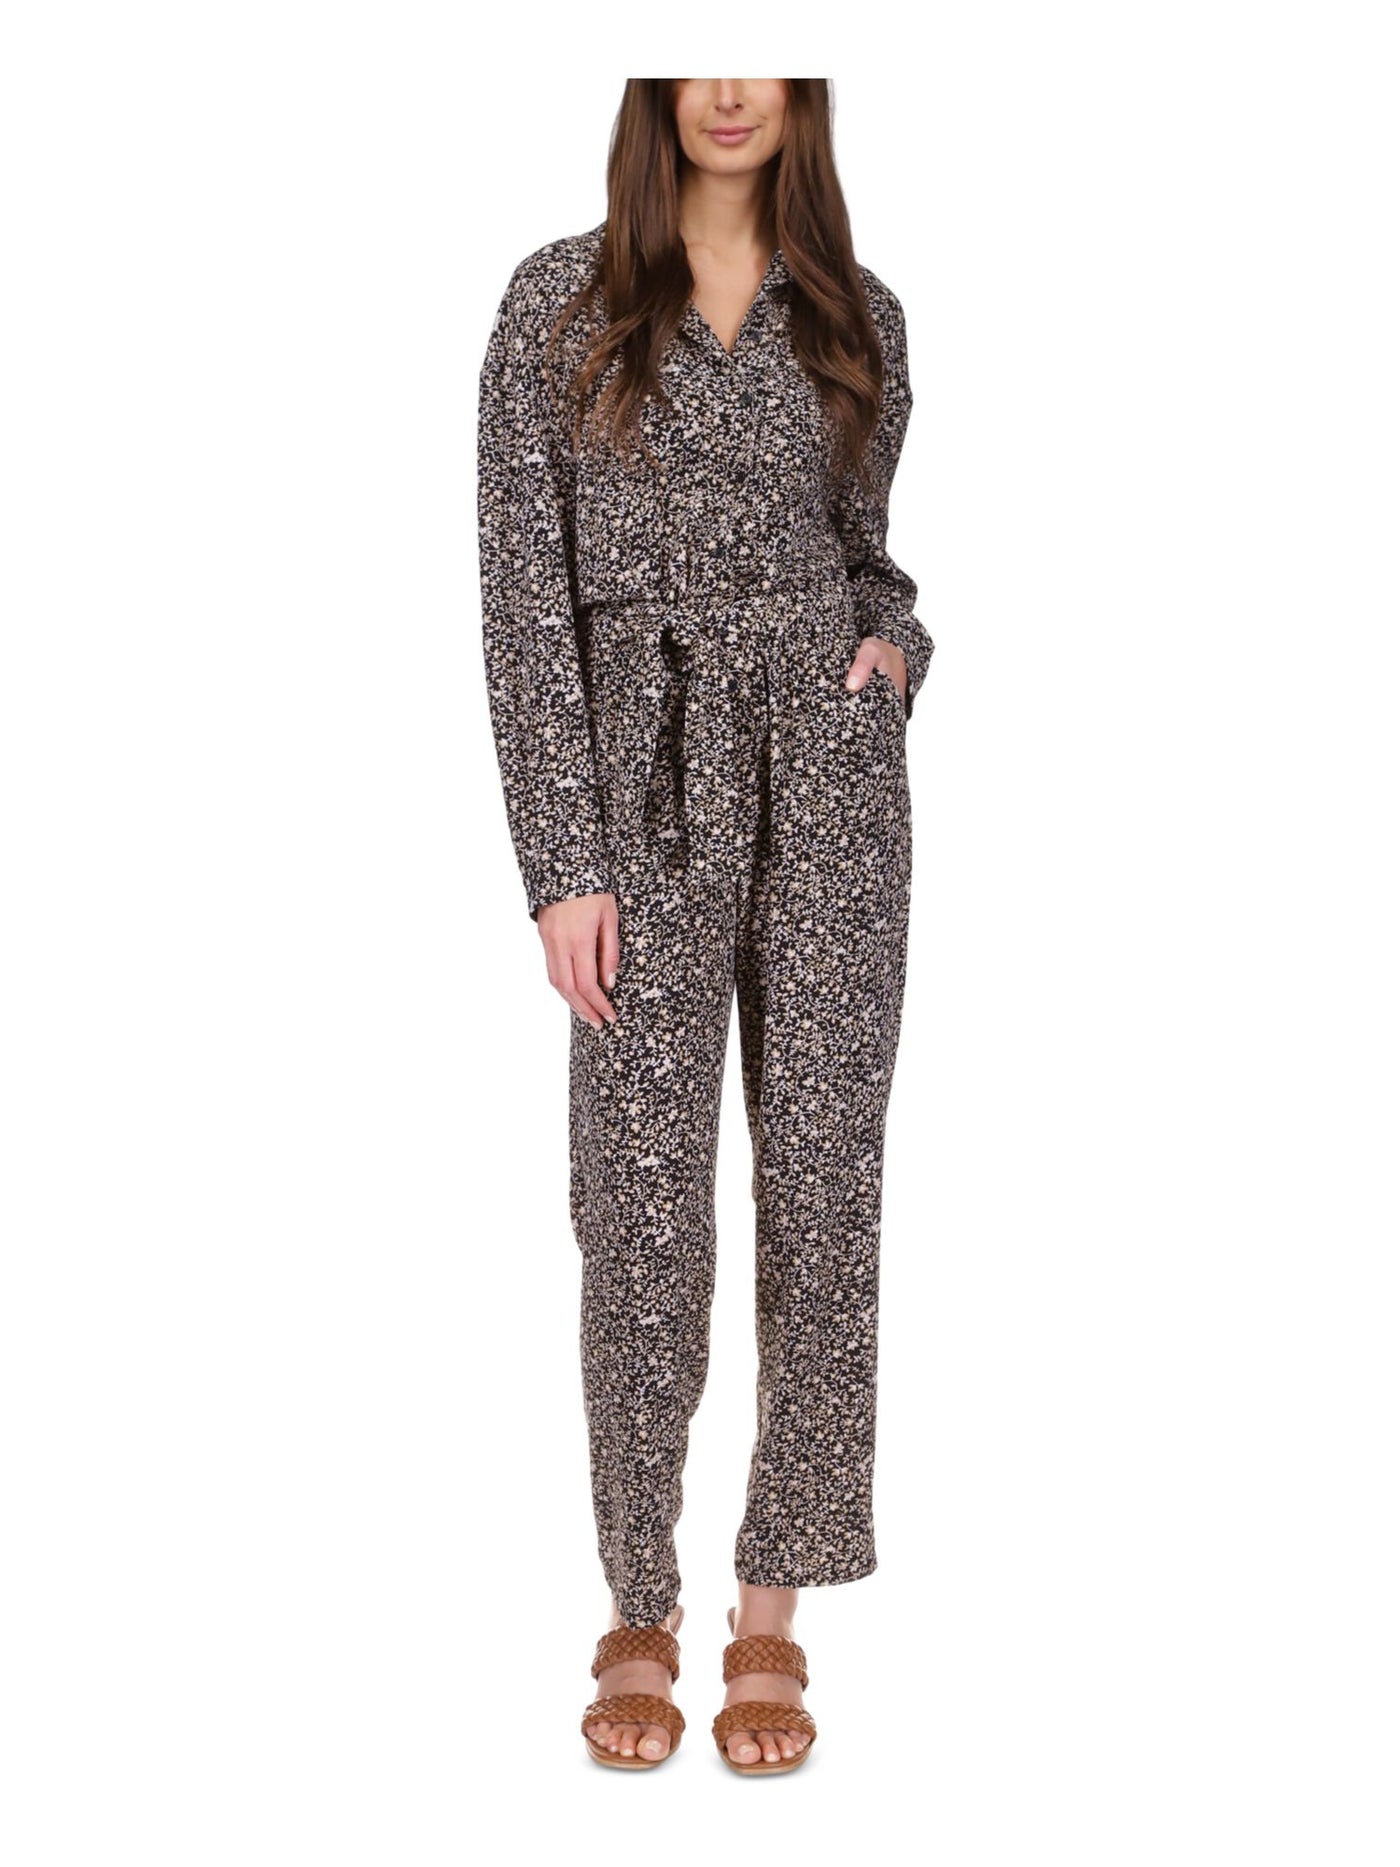 MICHAEL KORS Womens Black Lace Textured Tie Belt Pocketed Printed Long Sleeve Button Up Straight leg Jumpsuit XL